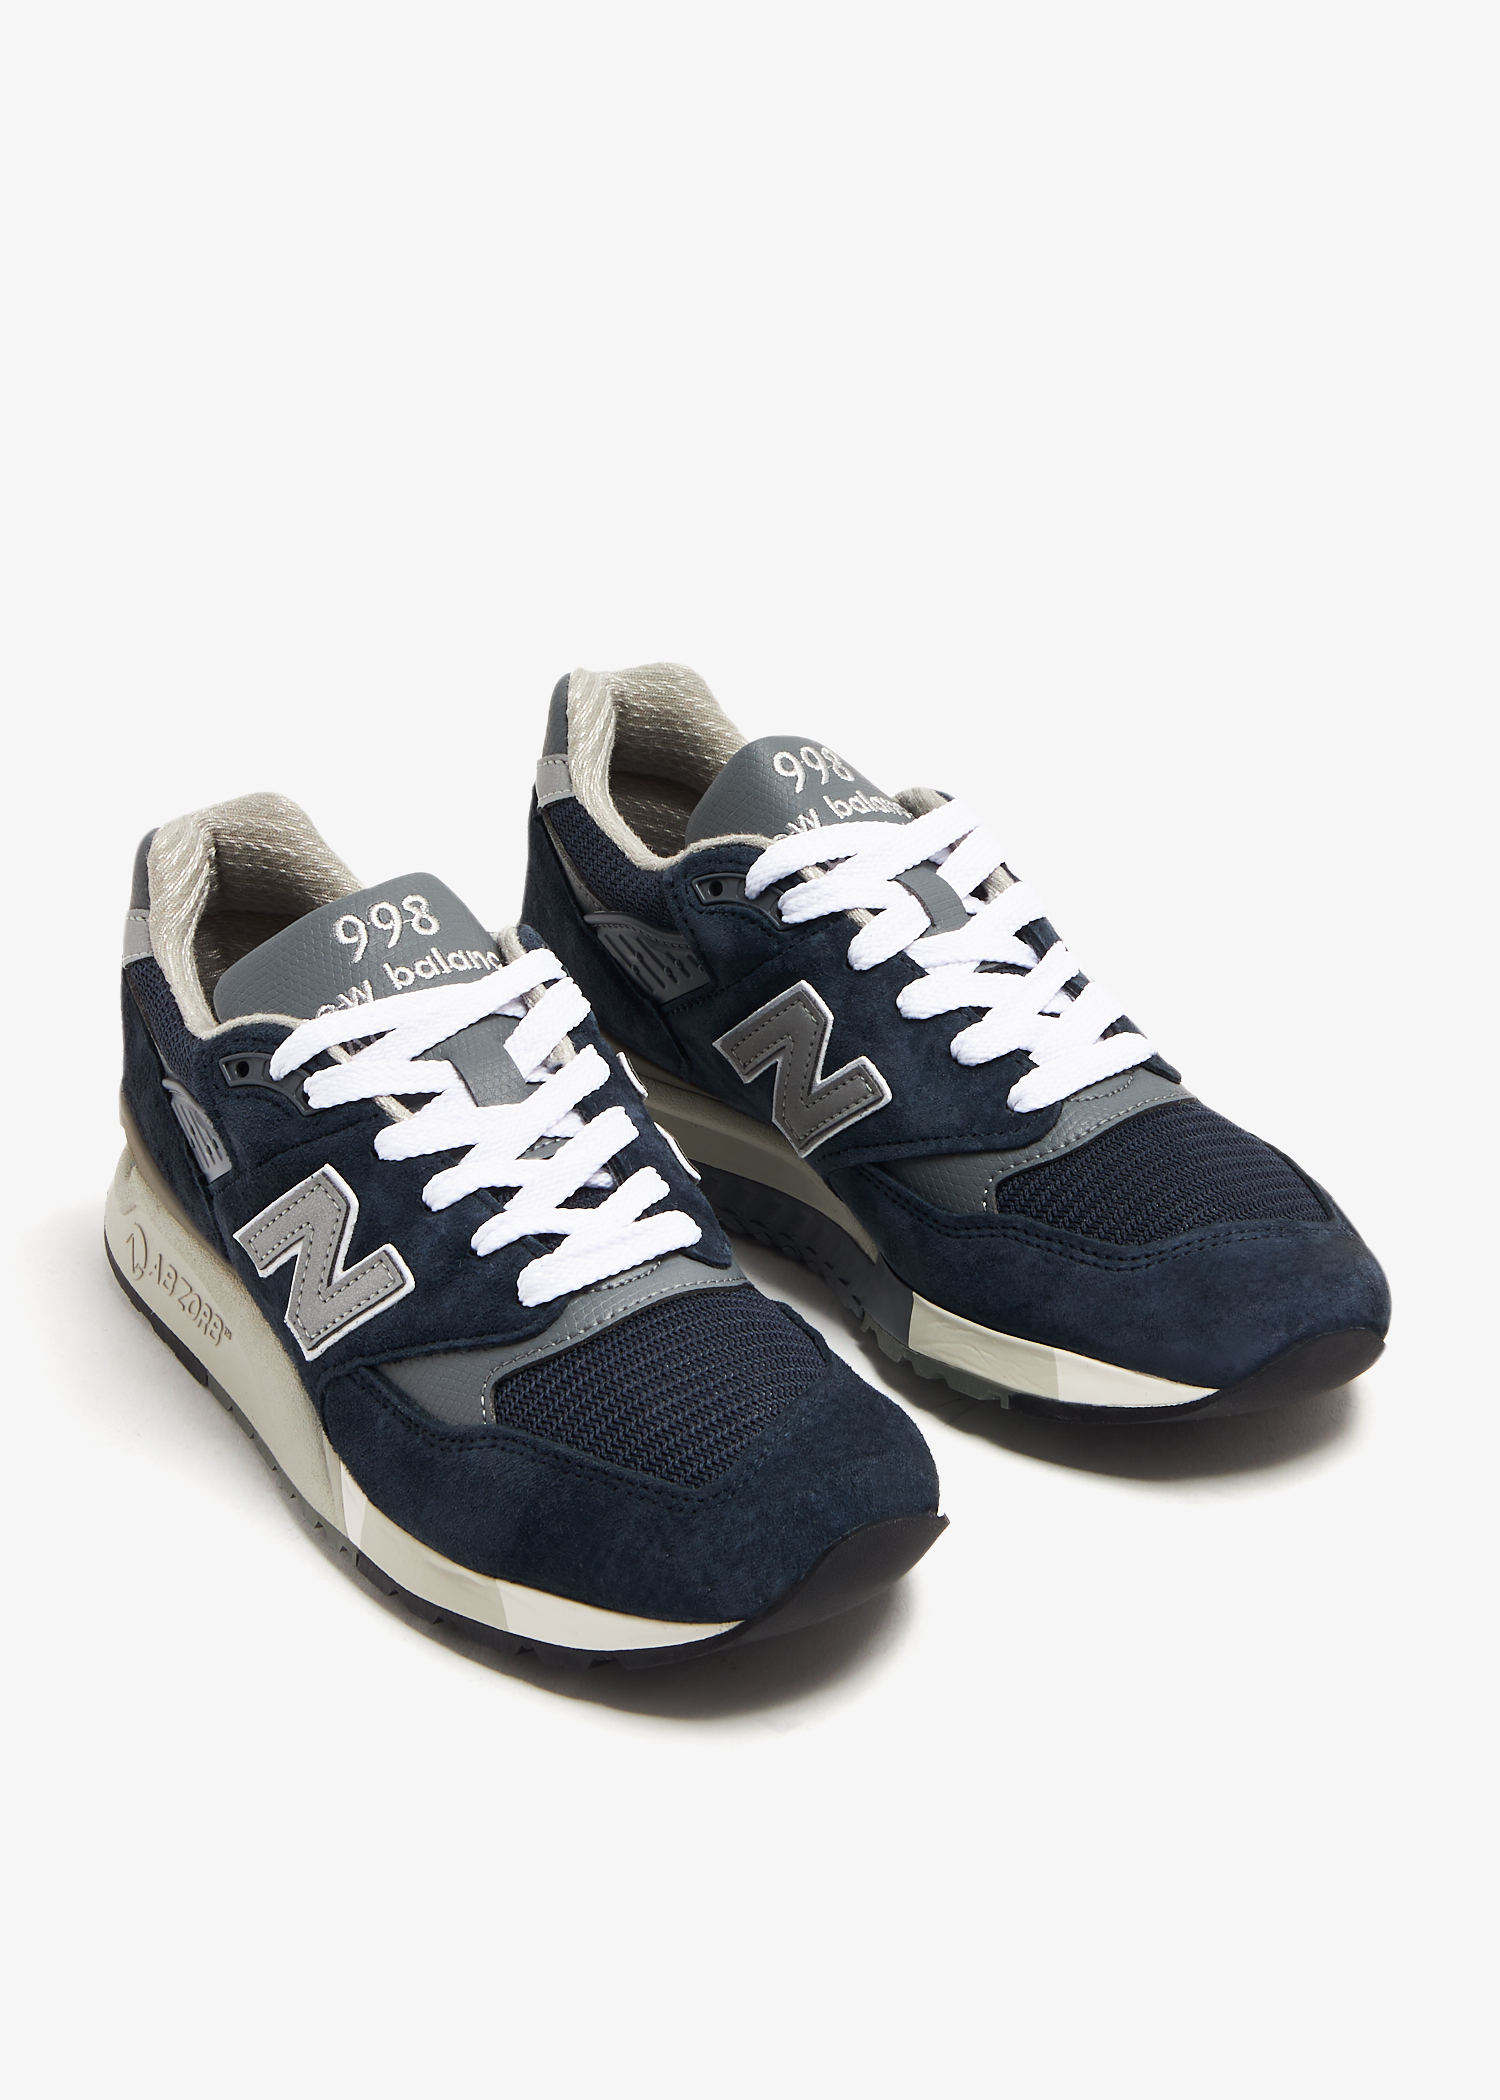 New Balance Made in USA 998 sneakers for Women - Blue in Qatar 